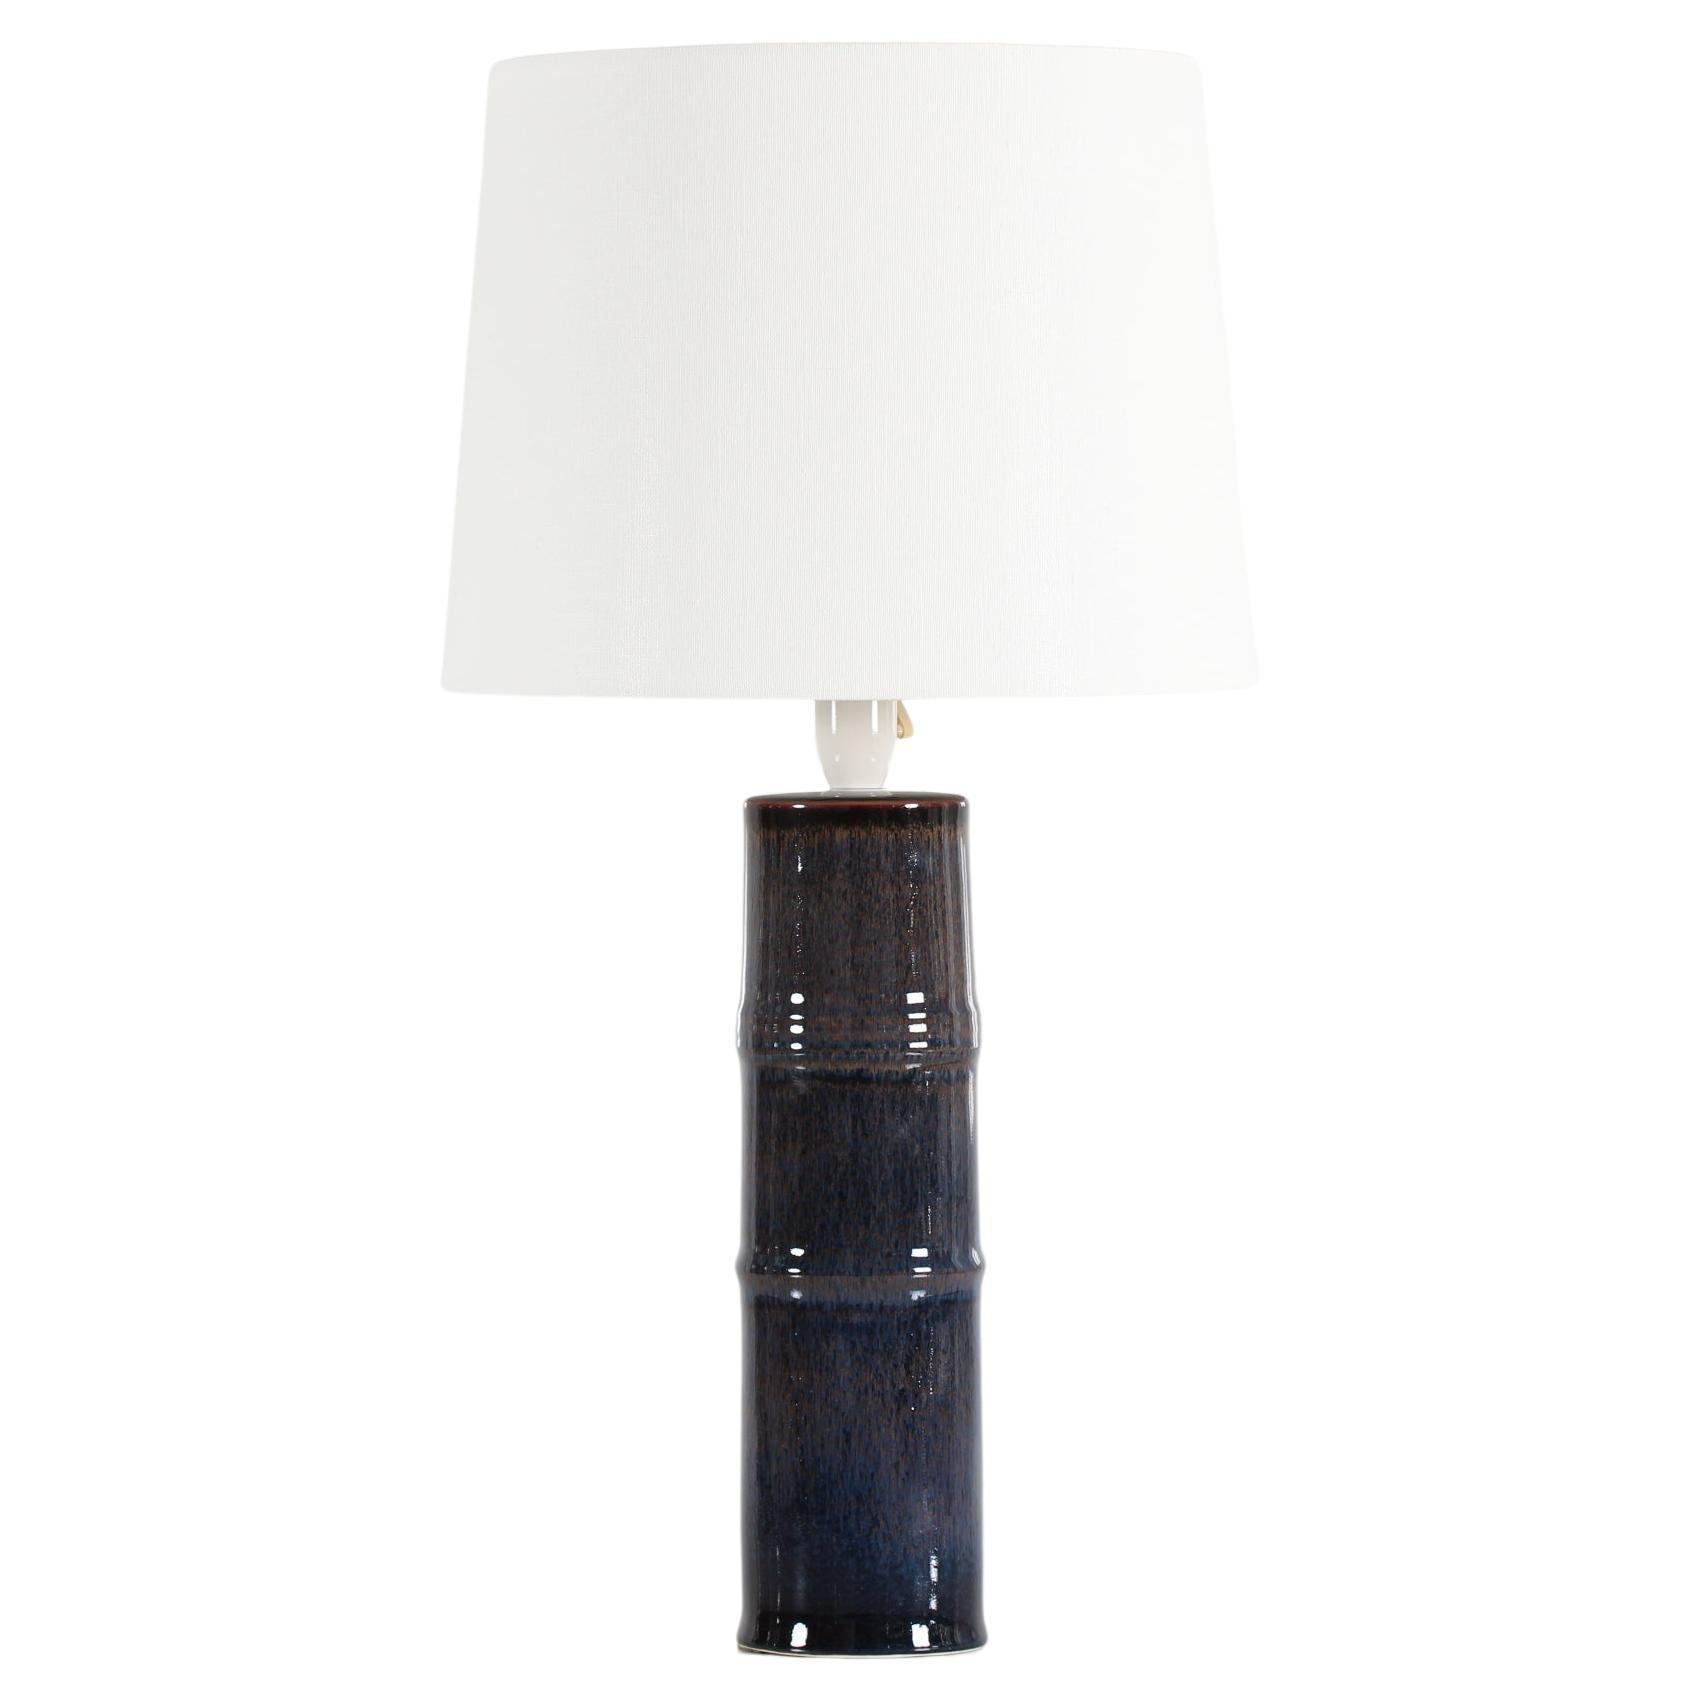 Tall Night Blue Carl-Harry Staalhane Table Lamp by Rörstrand in Sweden, 1960s For Sale